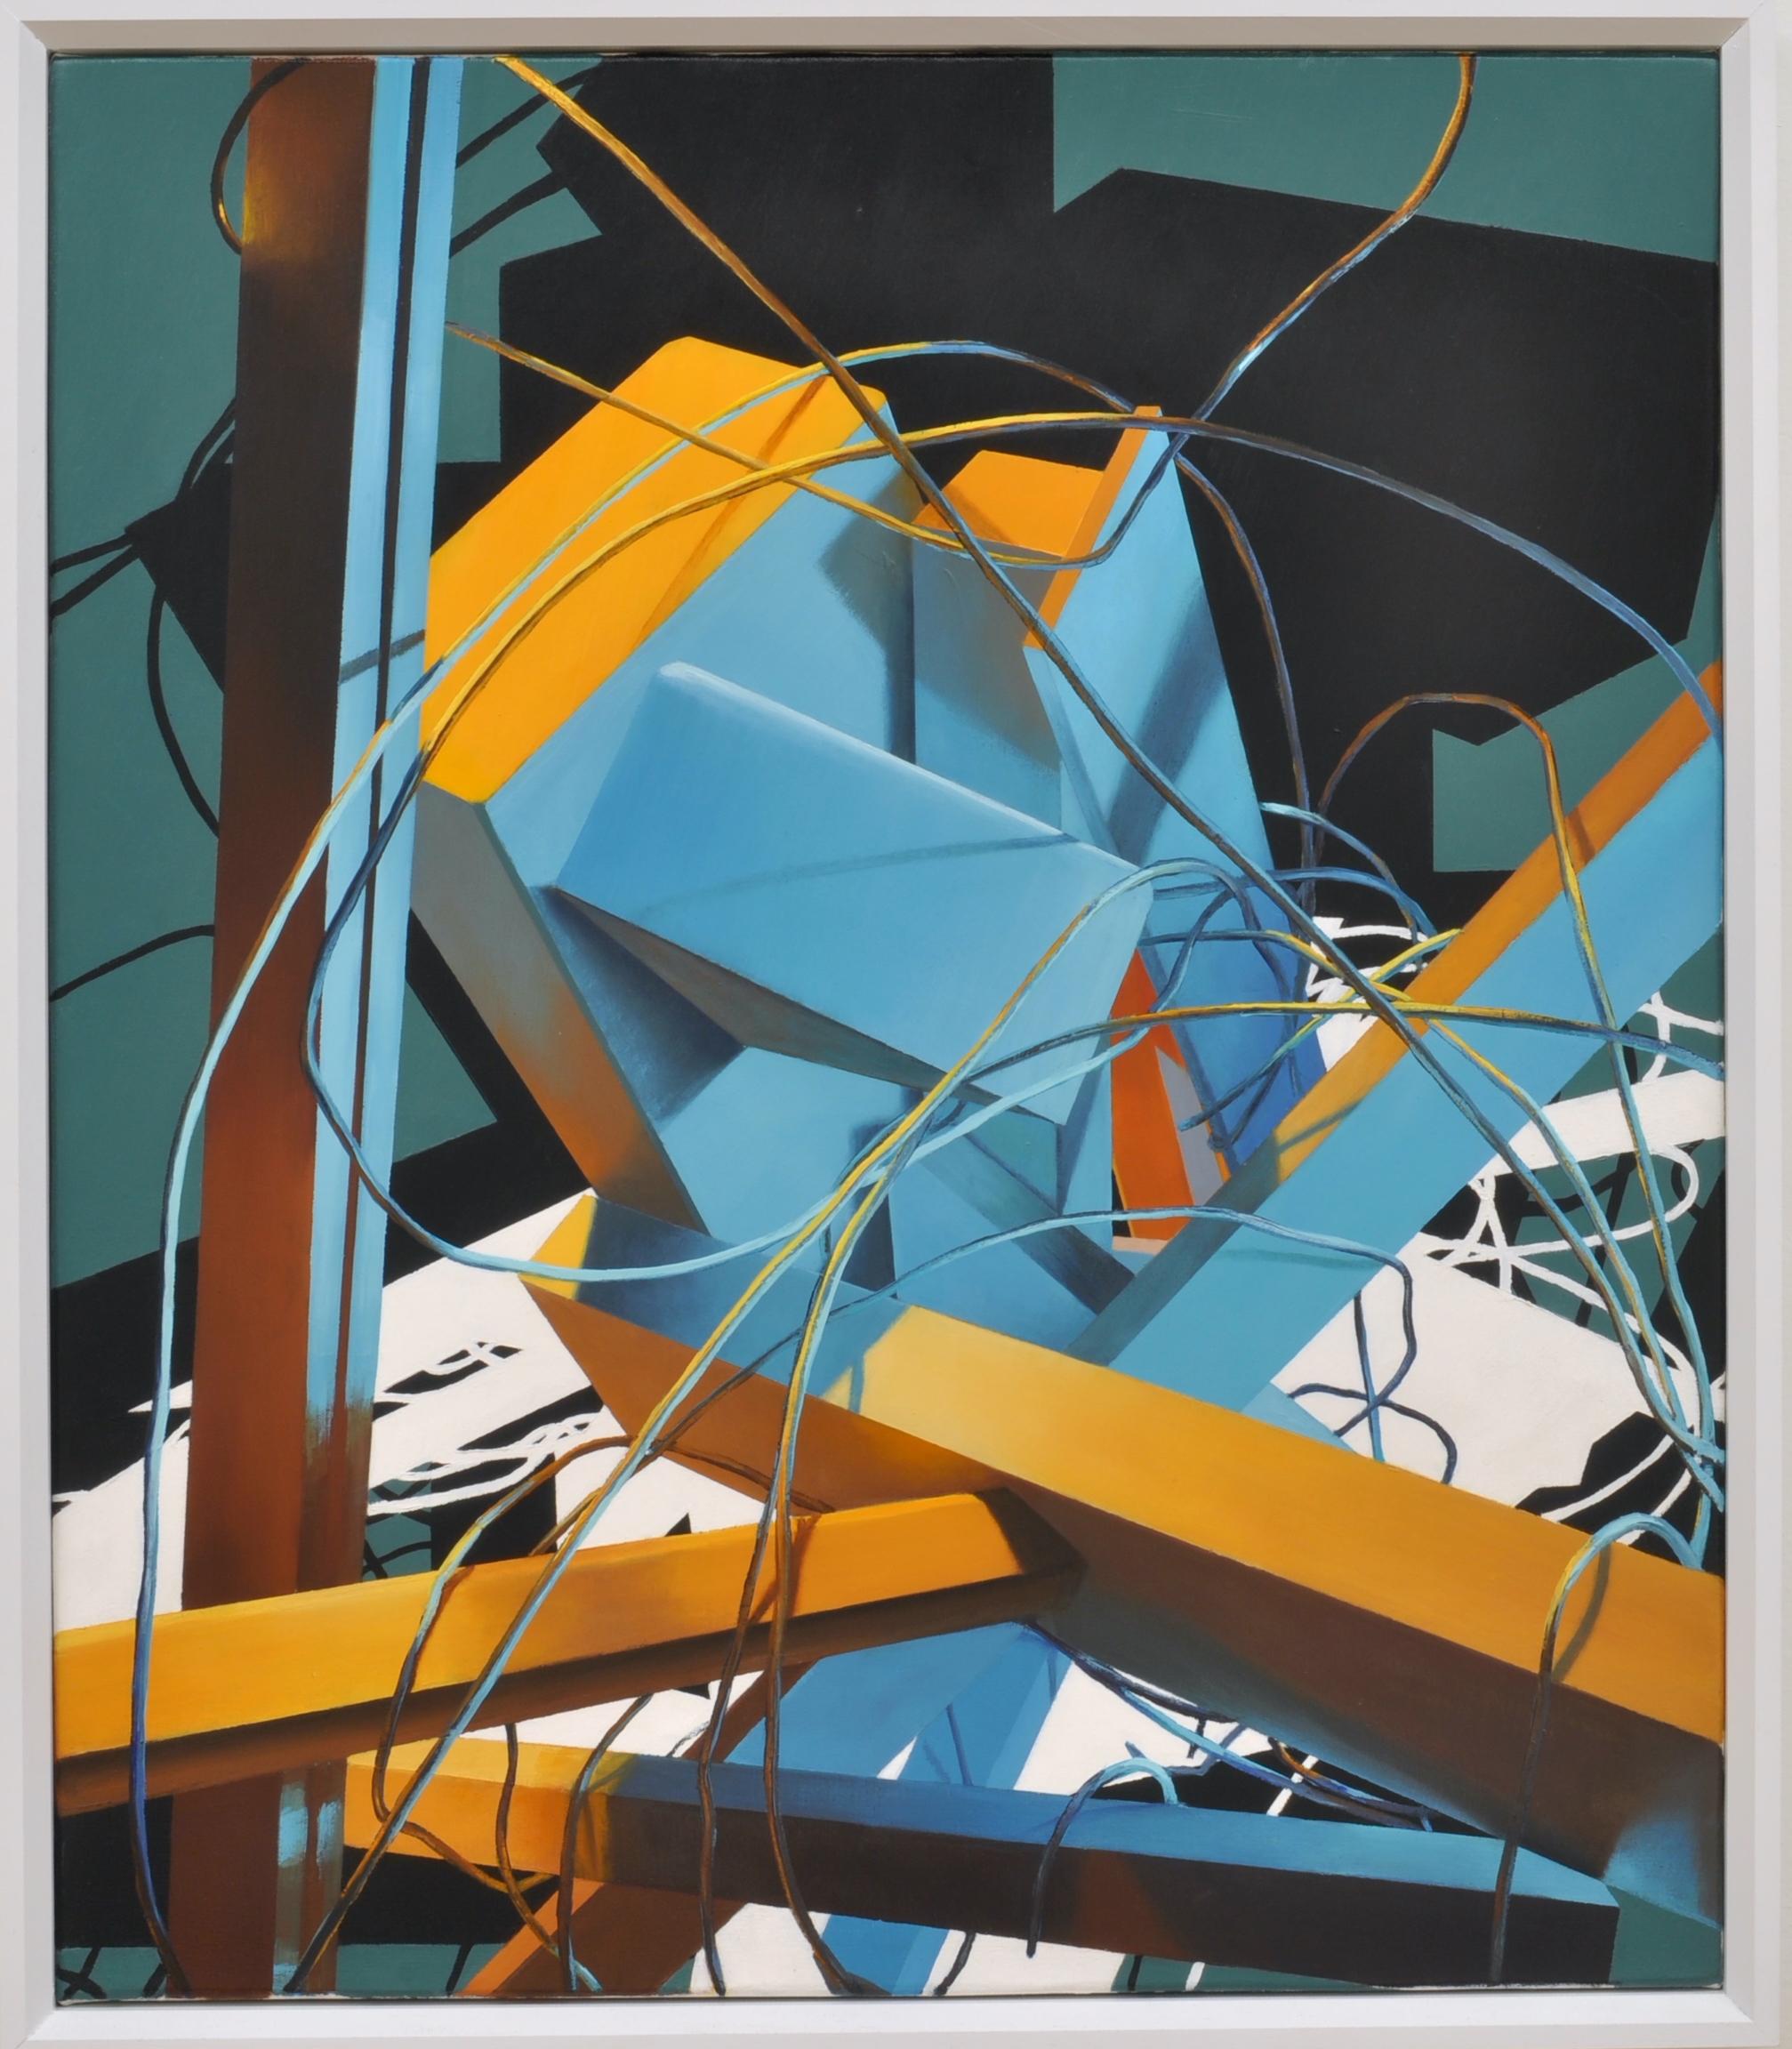 Donald Keefe Figurative Painting - UNTITLED CONSTRUCT 6 - Framed Abstract Painting in Blue, Yellow, White & Green